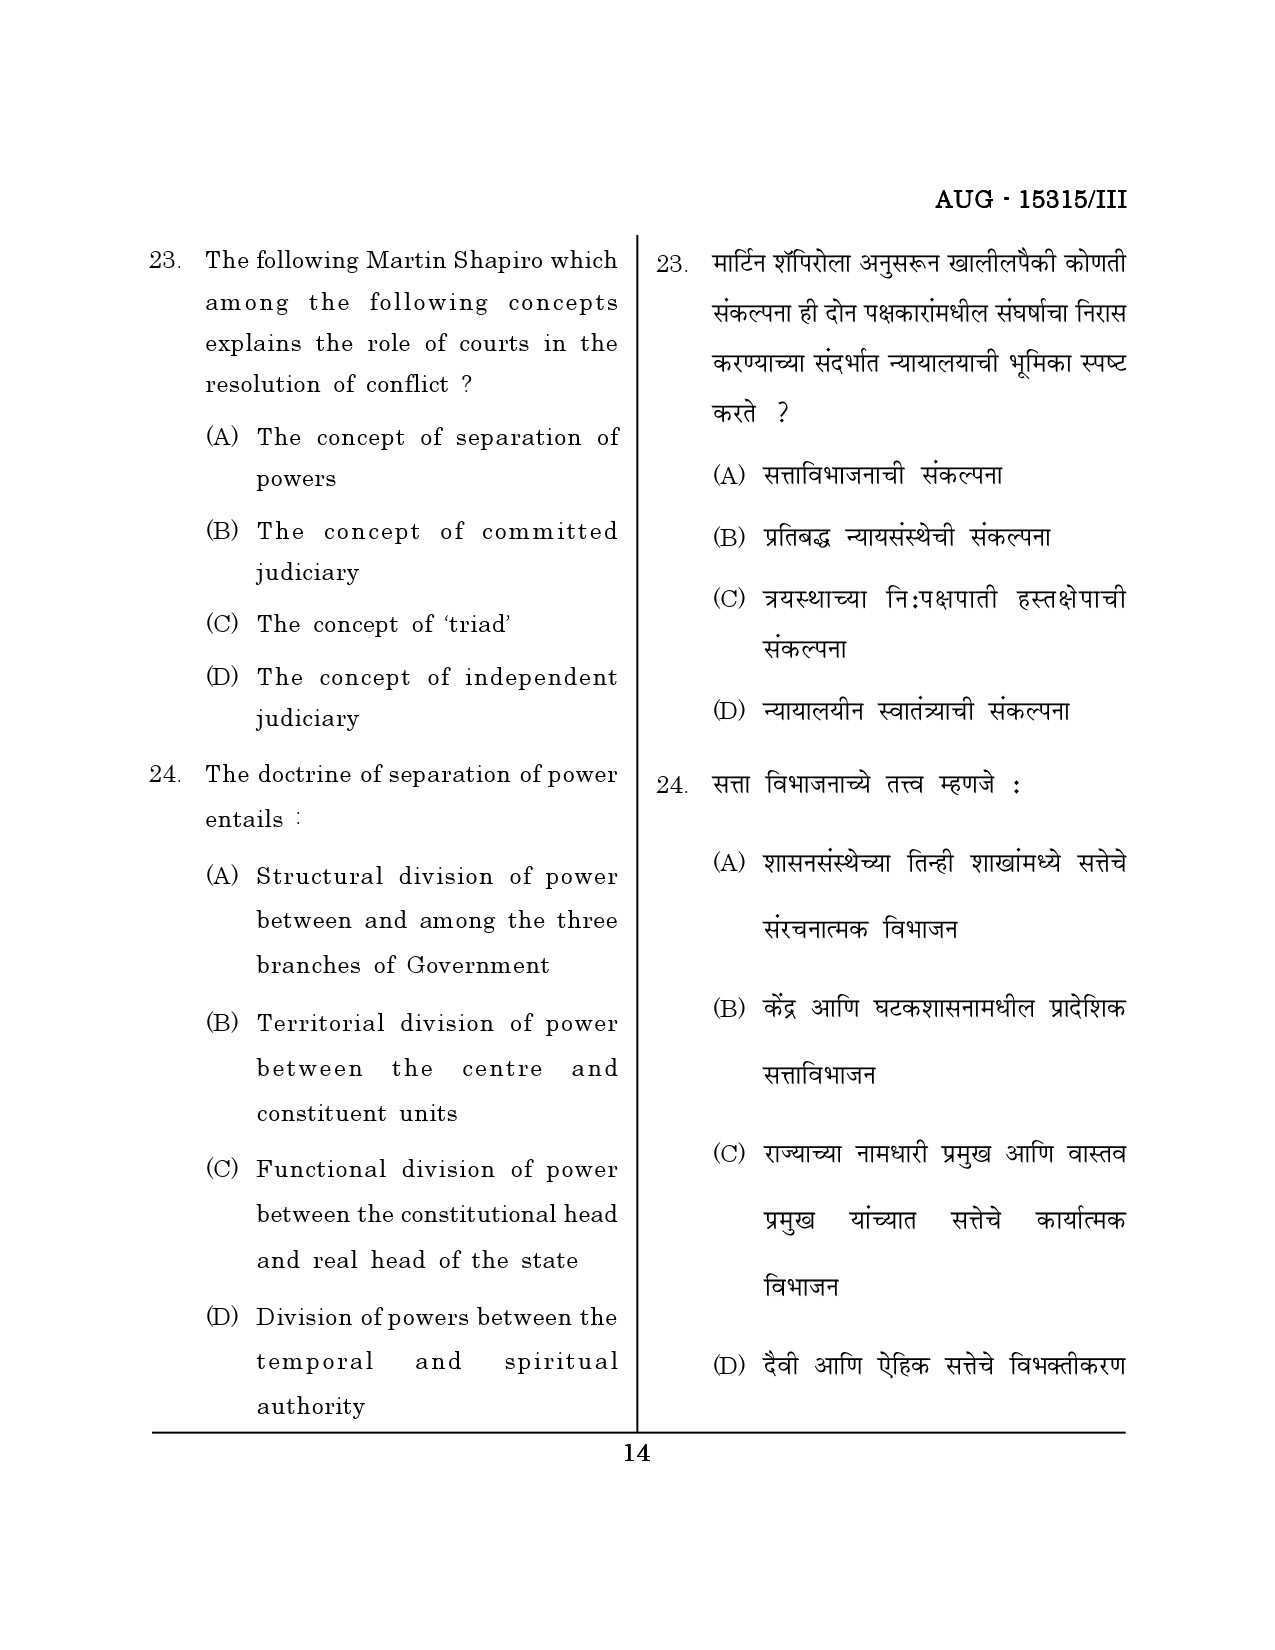 Maharashtra SET Political Science Question Paper III August 2015 13